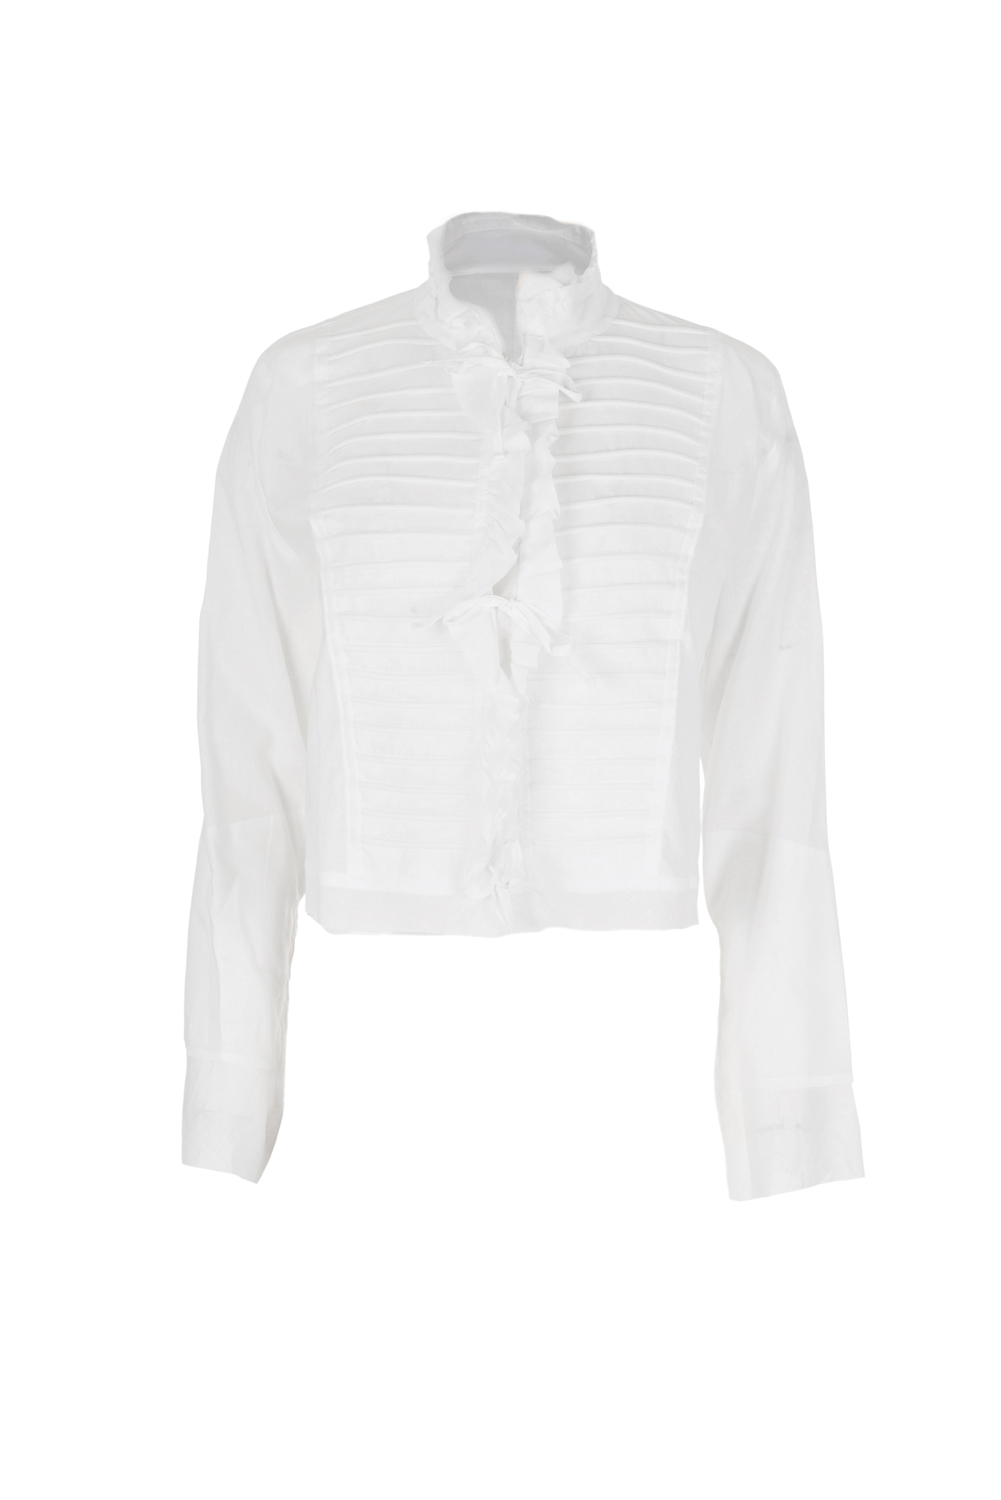 Lin and Cotton High Neck Shirt with Large Pin-Tucks,Frills and Tie Fastening